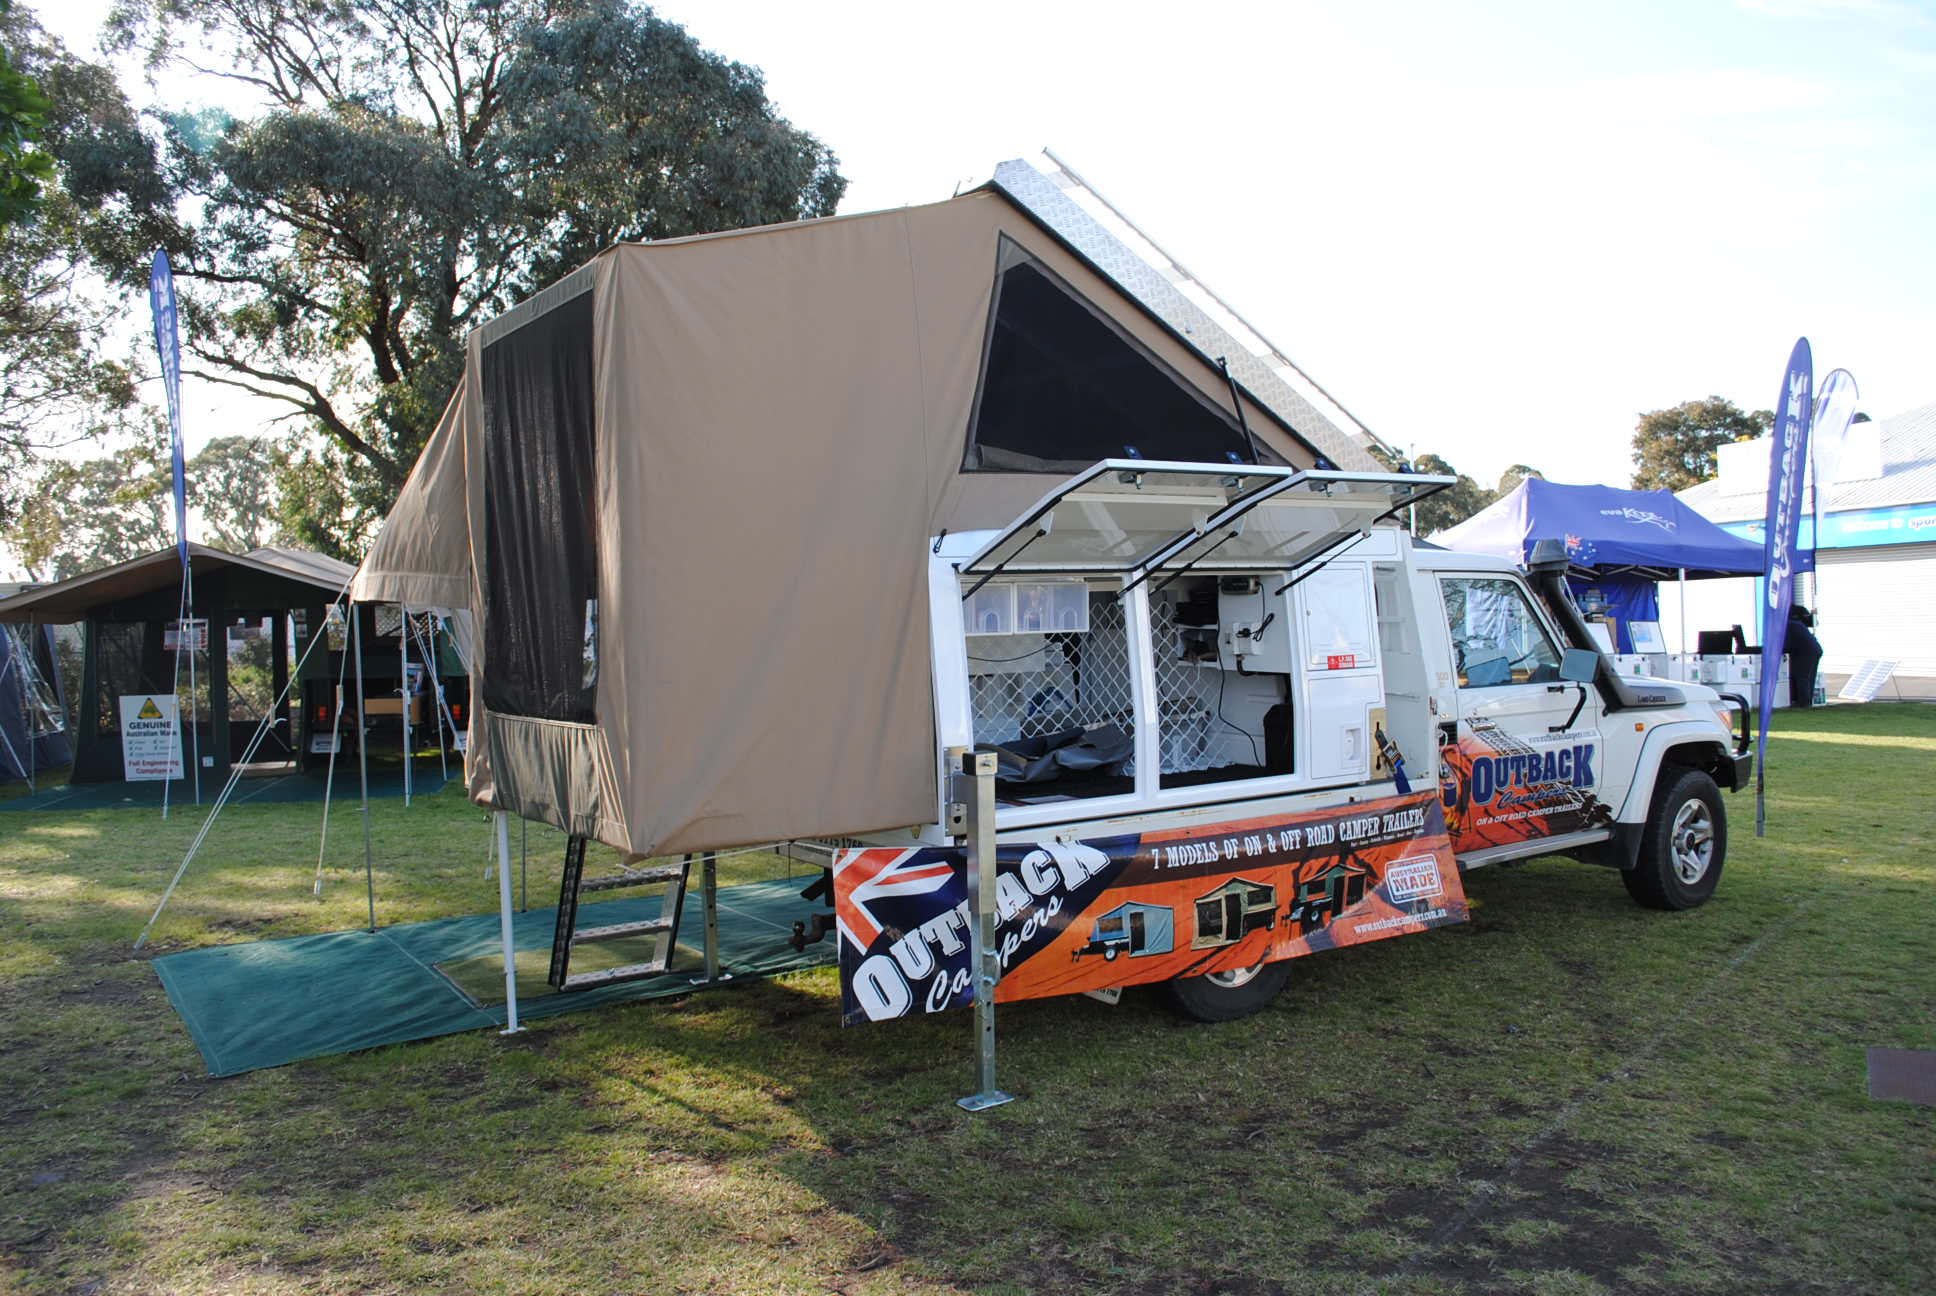 Extra Cab | Outback Campers | Camper Trailers Melbourne